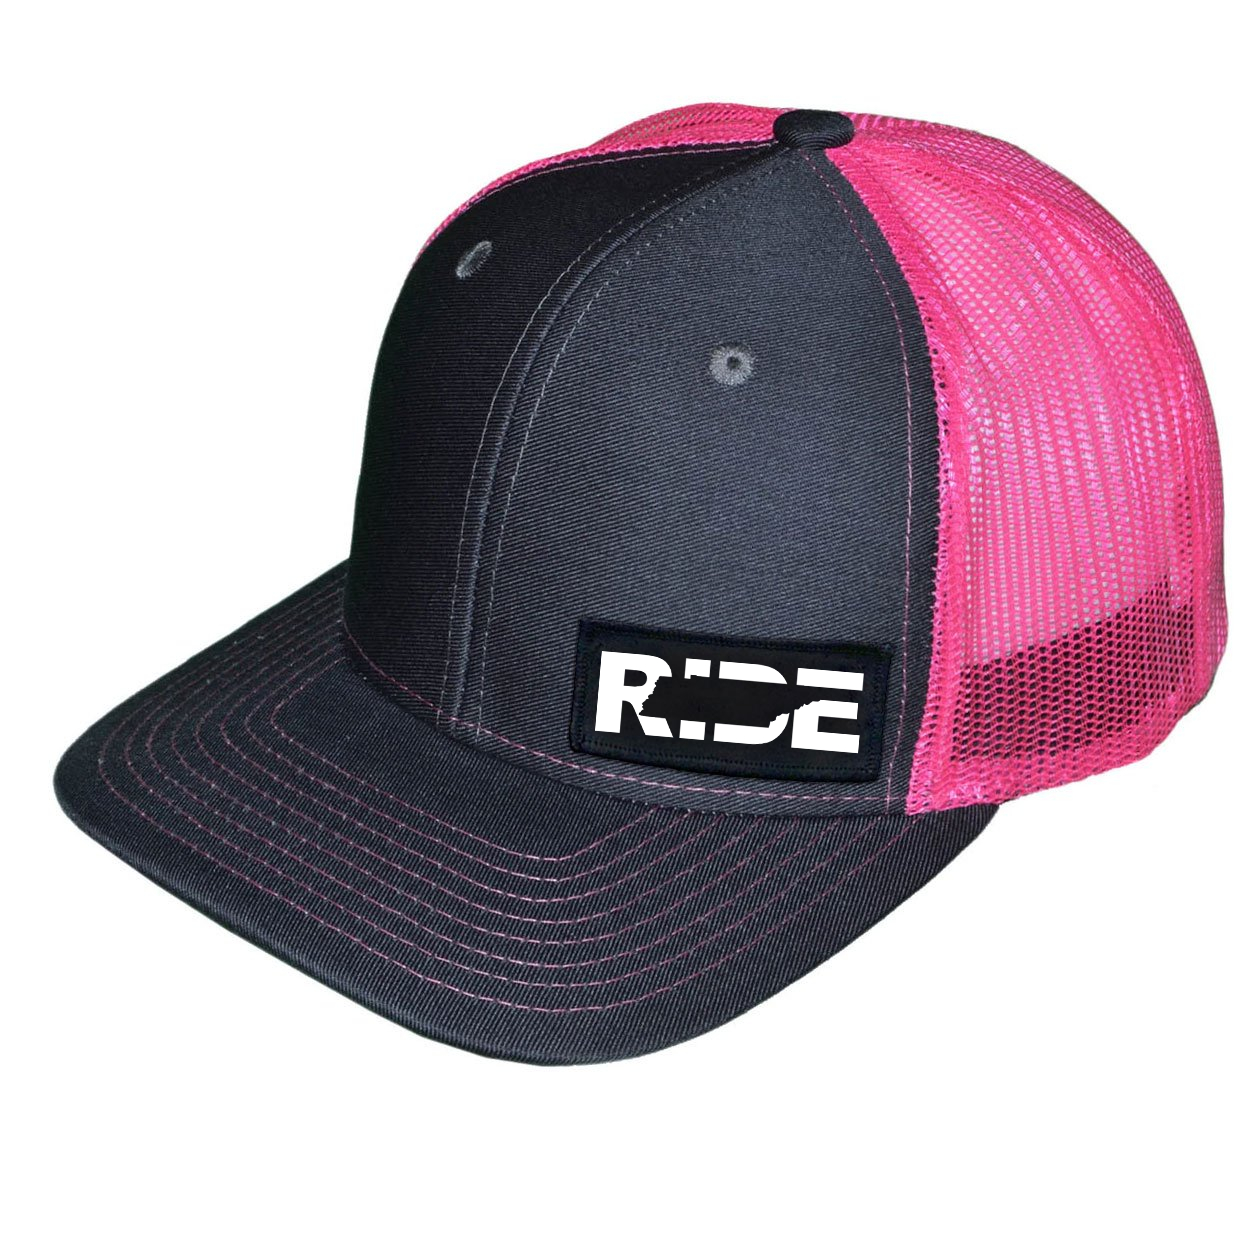 Ride Tennessee Night Out Woven Patch Snapback Trucker Hat Charcoal/Neon Pink (White Logo)